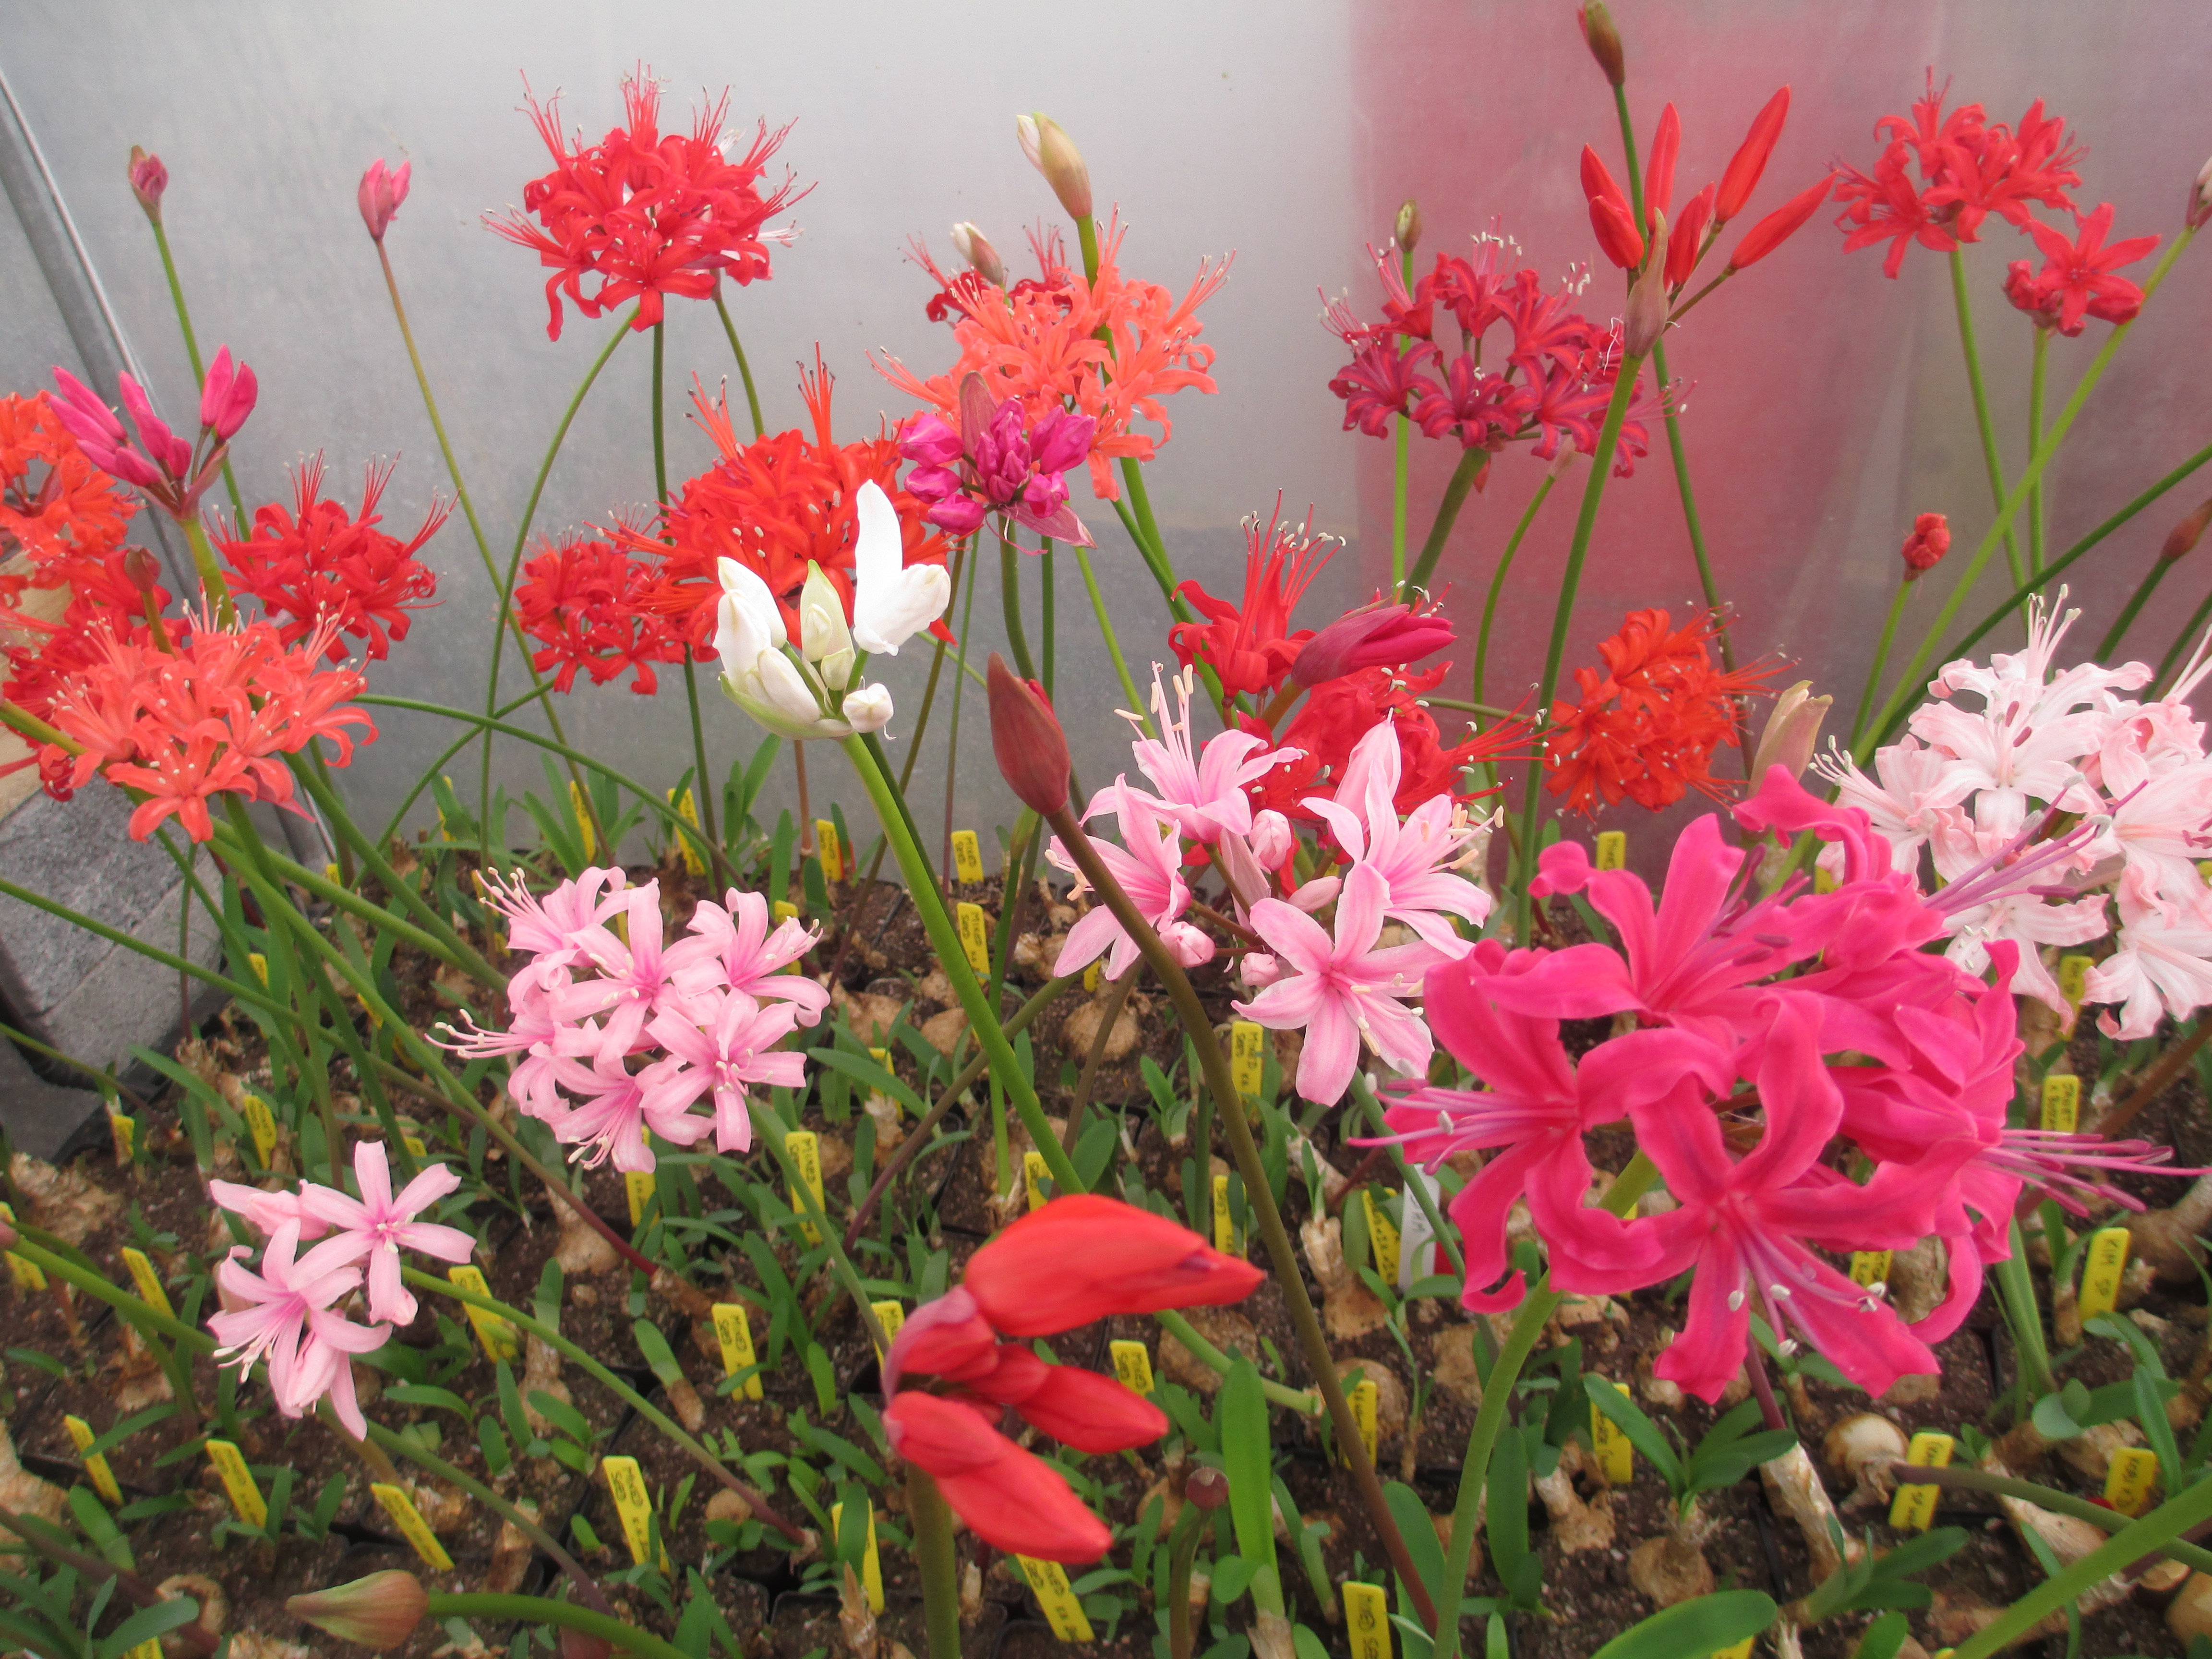 Nerine Sarniensis which require the protection of a tunnel.